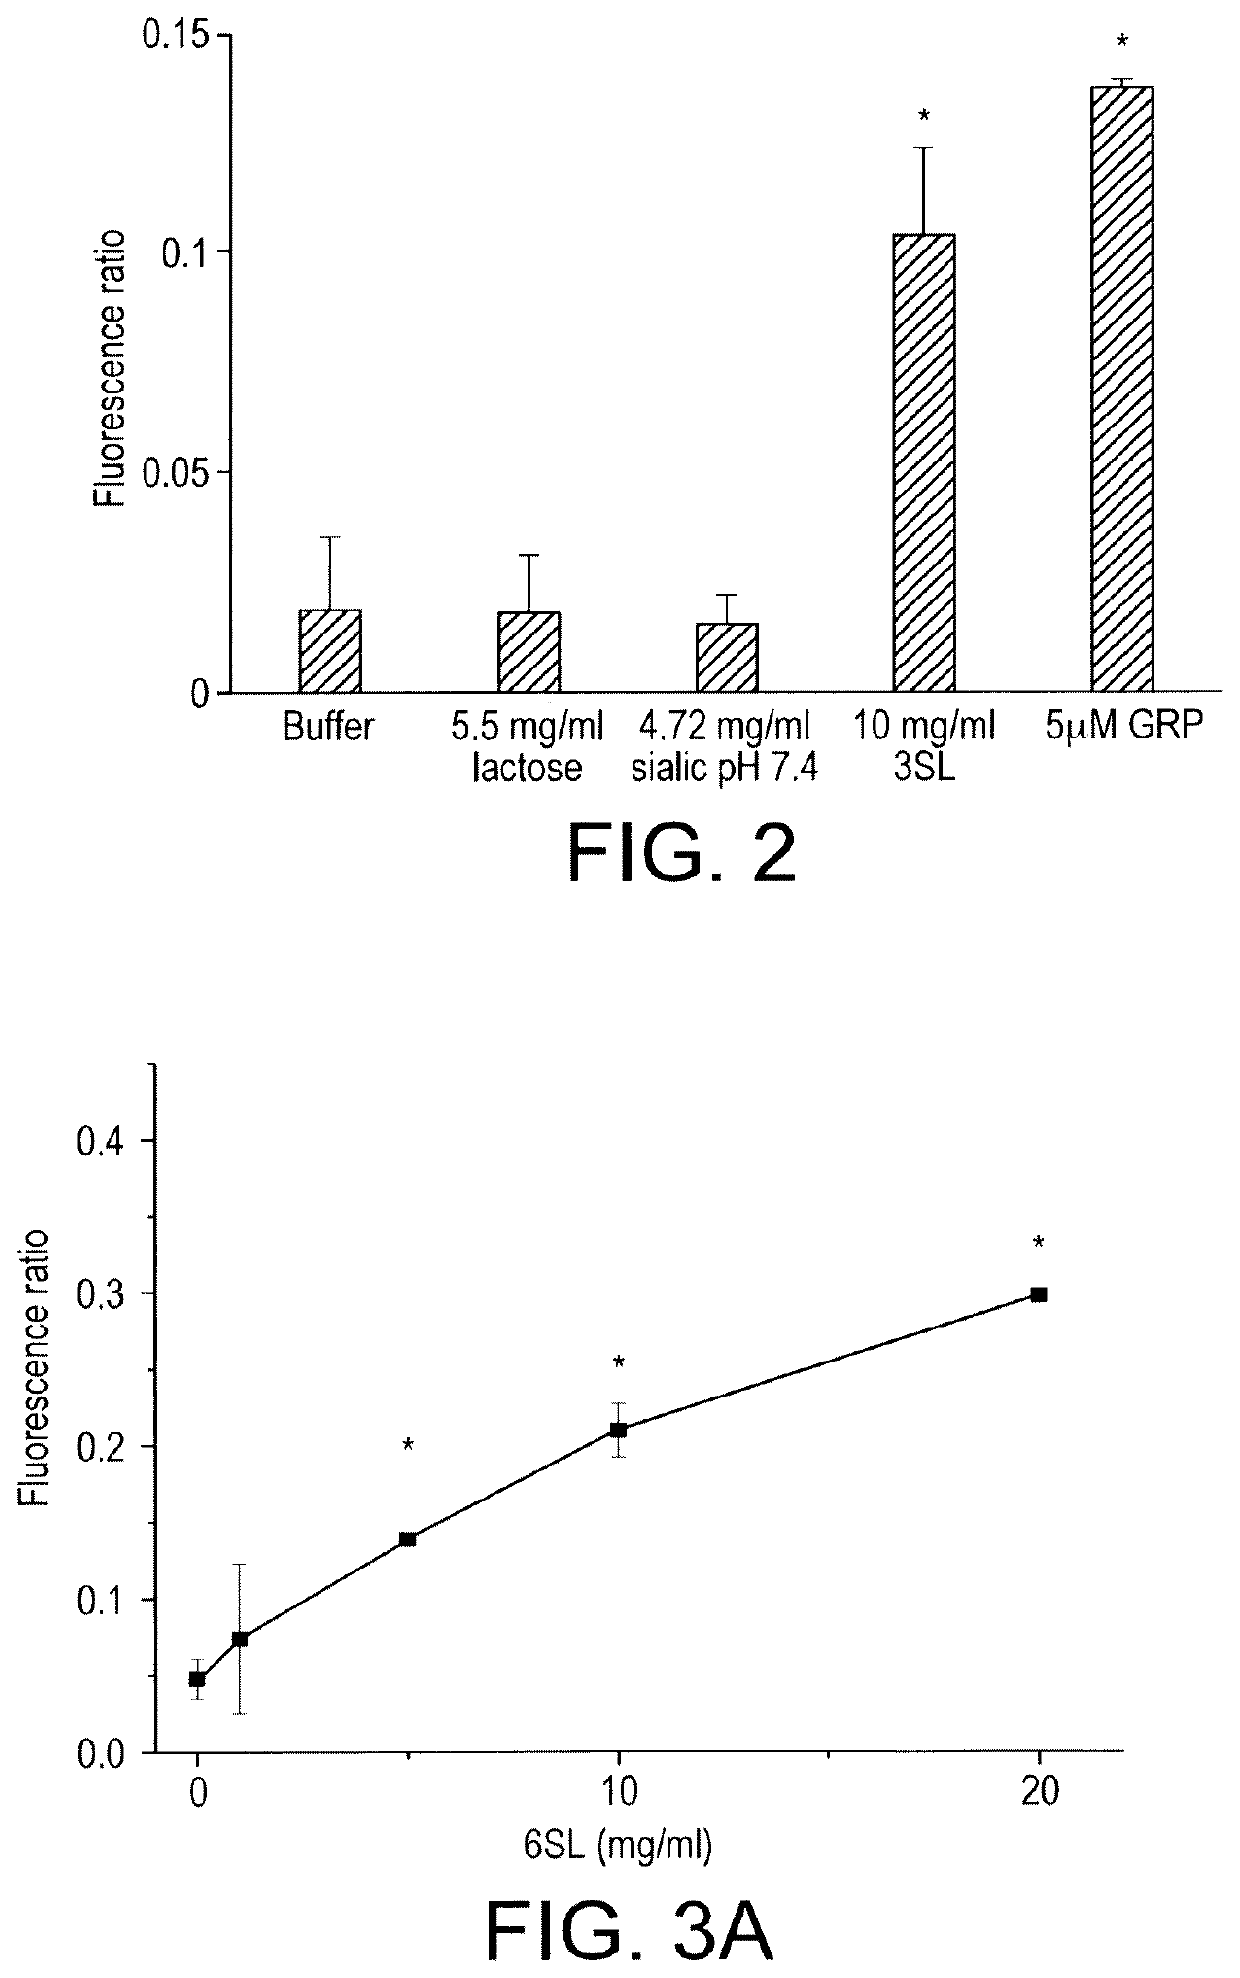 Compositions comprising sialylated oligosaccharides for use in infants or young children to prevent later in life obesity or related comorbidities and promote a healthy growth